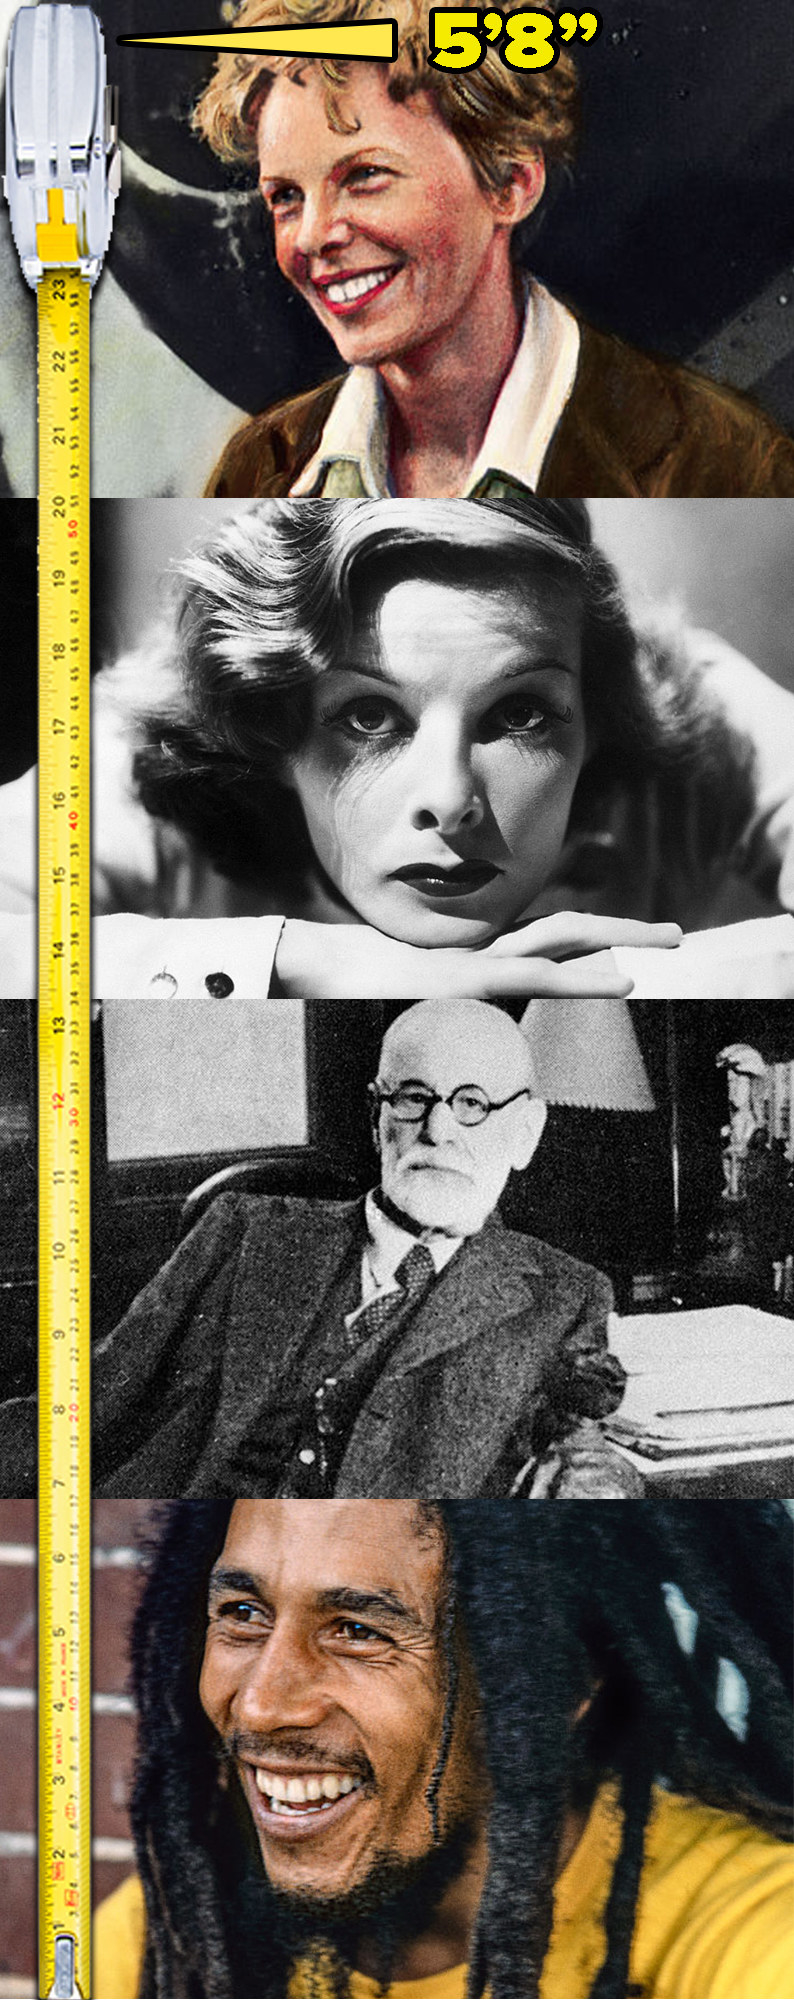 Stacked images of Amelia Earhart, Katharine Hepburn, Sigmund Freud, and Bob Marley next to a measuring tape